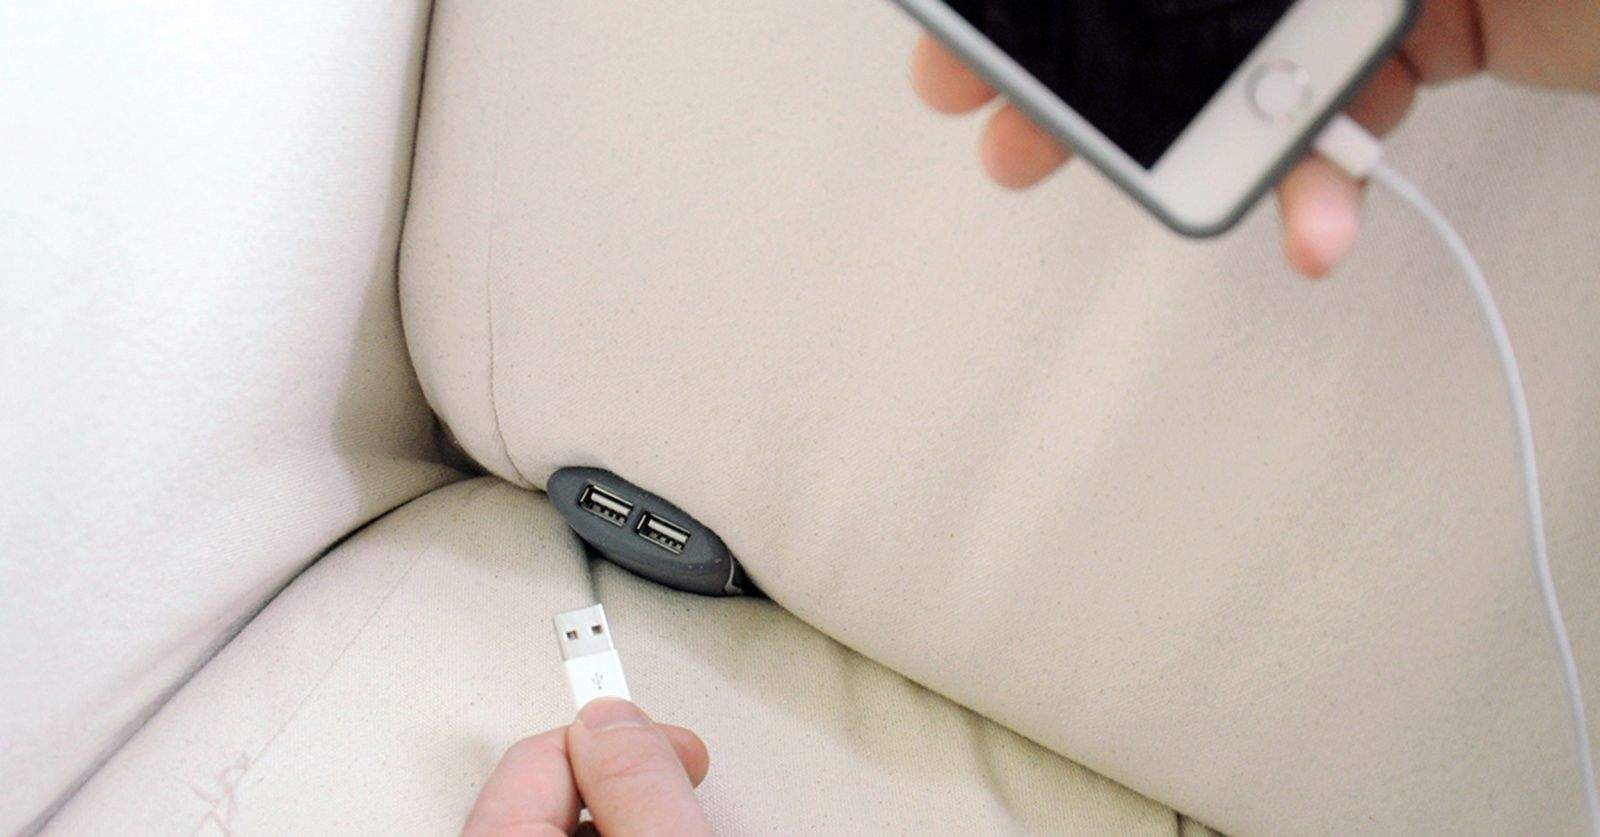 The Couchlet nestles between cushions or under a mattress to make for a more comfortable reach of your phone when charging. Photo: Trident Designs